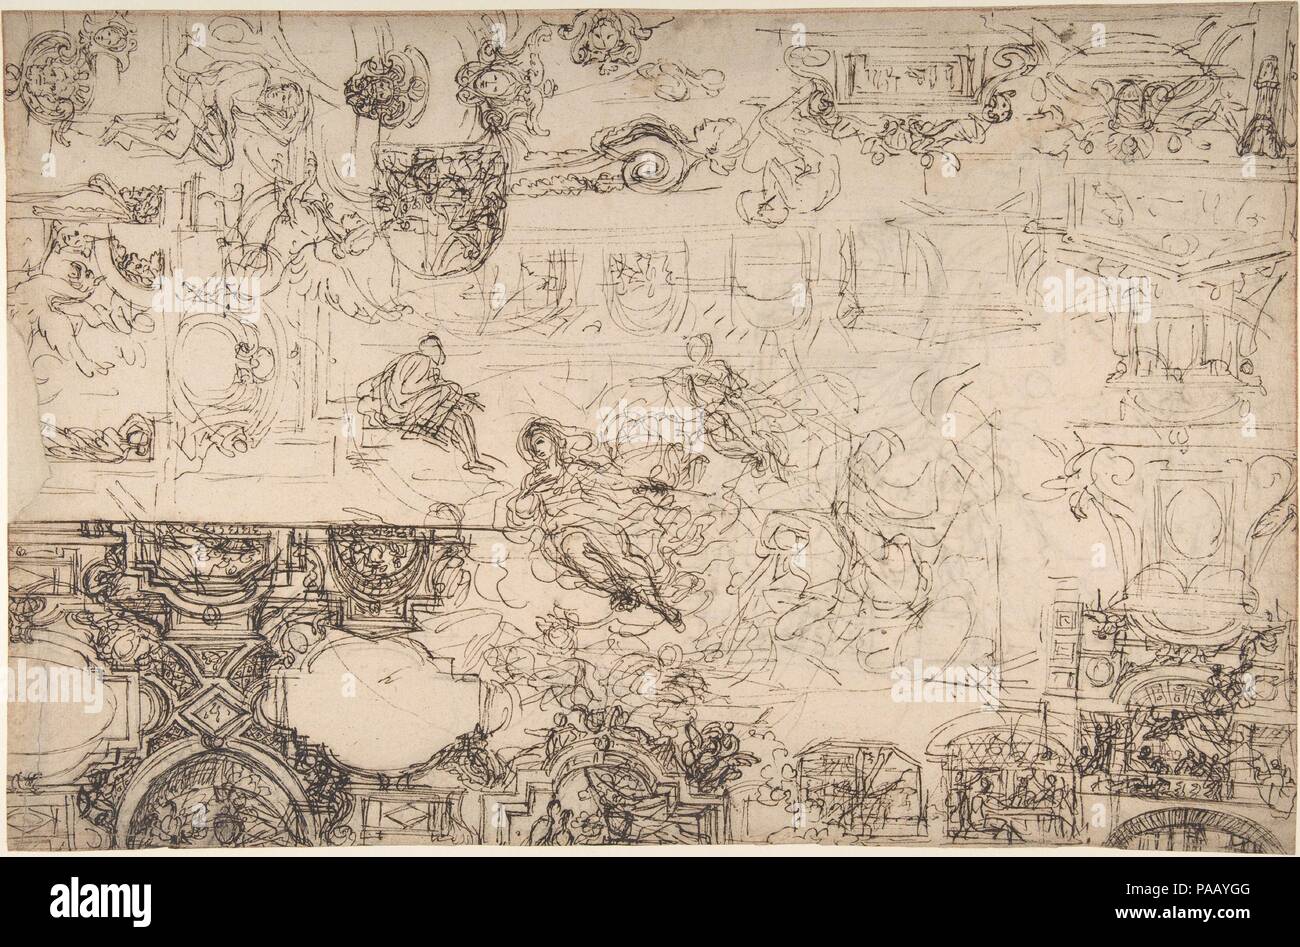 Studies for a Ceiling (recto and verso). Artist: Michel Corneille the Younger (French, Paris 1642-1708 Paris). Dimensions: 11 5/16 x 17 3/8 in.  (28.8 x 44.1 cm). Former Attribution: Formerly attributed to Pietro da Cortona (Pietro Berrettini) (Italian, Cortona 1596-1669 Rome). Date: n.d..  This sheet of energetic sketches has been attributed to the French seventeenth-century painter Michel Corneille the Younger, a successful and prolific decorator of royal residences. The artist studied in Italy and trained under Pierre Mignard (French, 1613-1676) and Charles Le Brun (French, 1619-1690). Corn Stock Photo